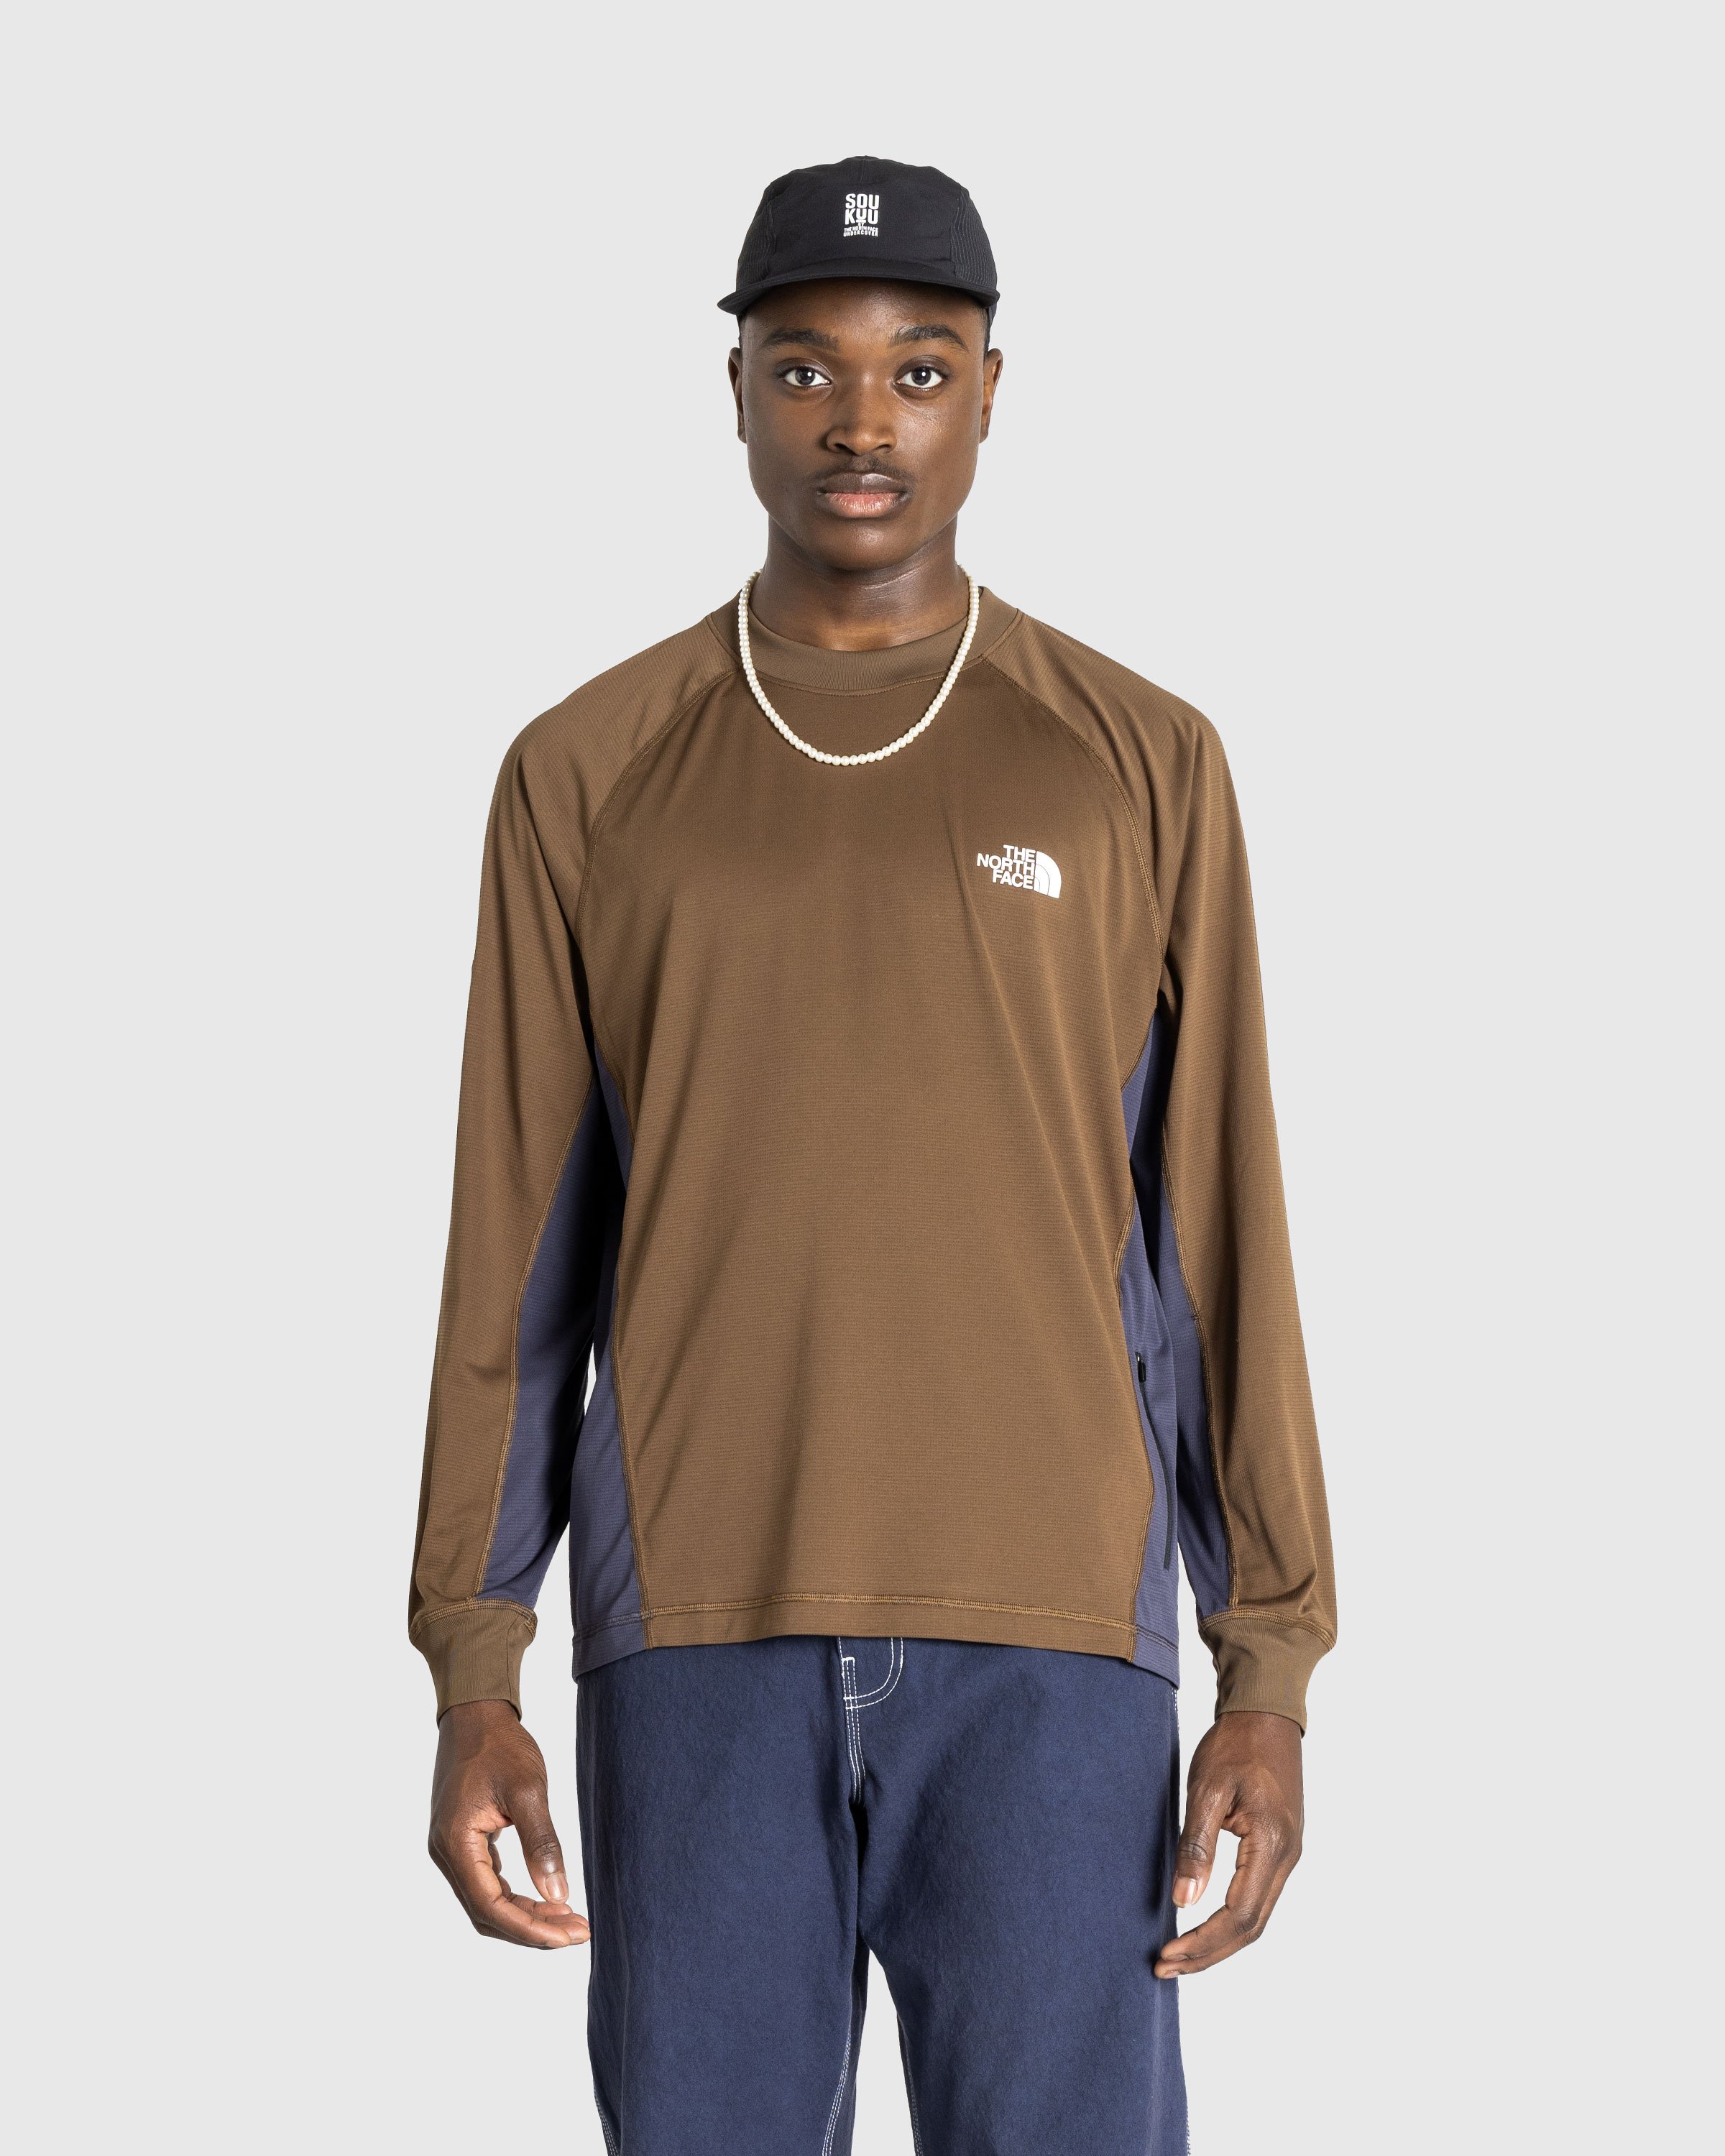 The North Face x UNDERCOVER - SOUKUU TRAIL RUN L/S TEE PERISCOPE GREY/DARK EAR - Clothing - Grey - Image 2